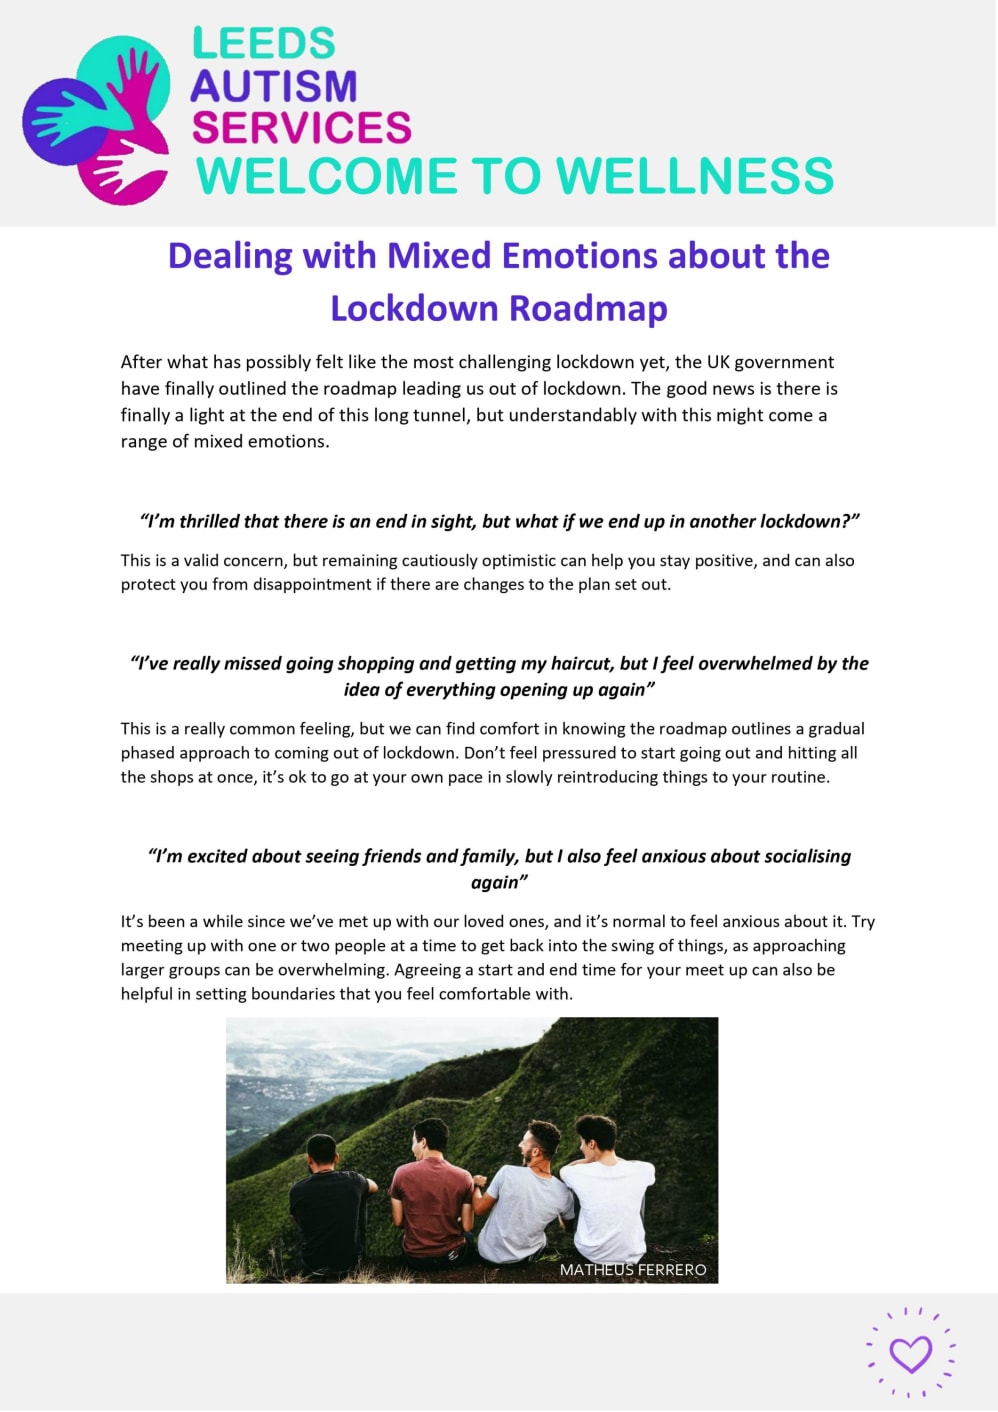 Dealing with Mixed Emotions Page 1